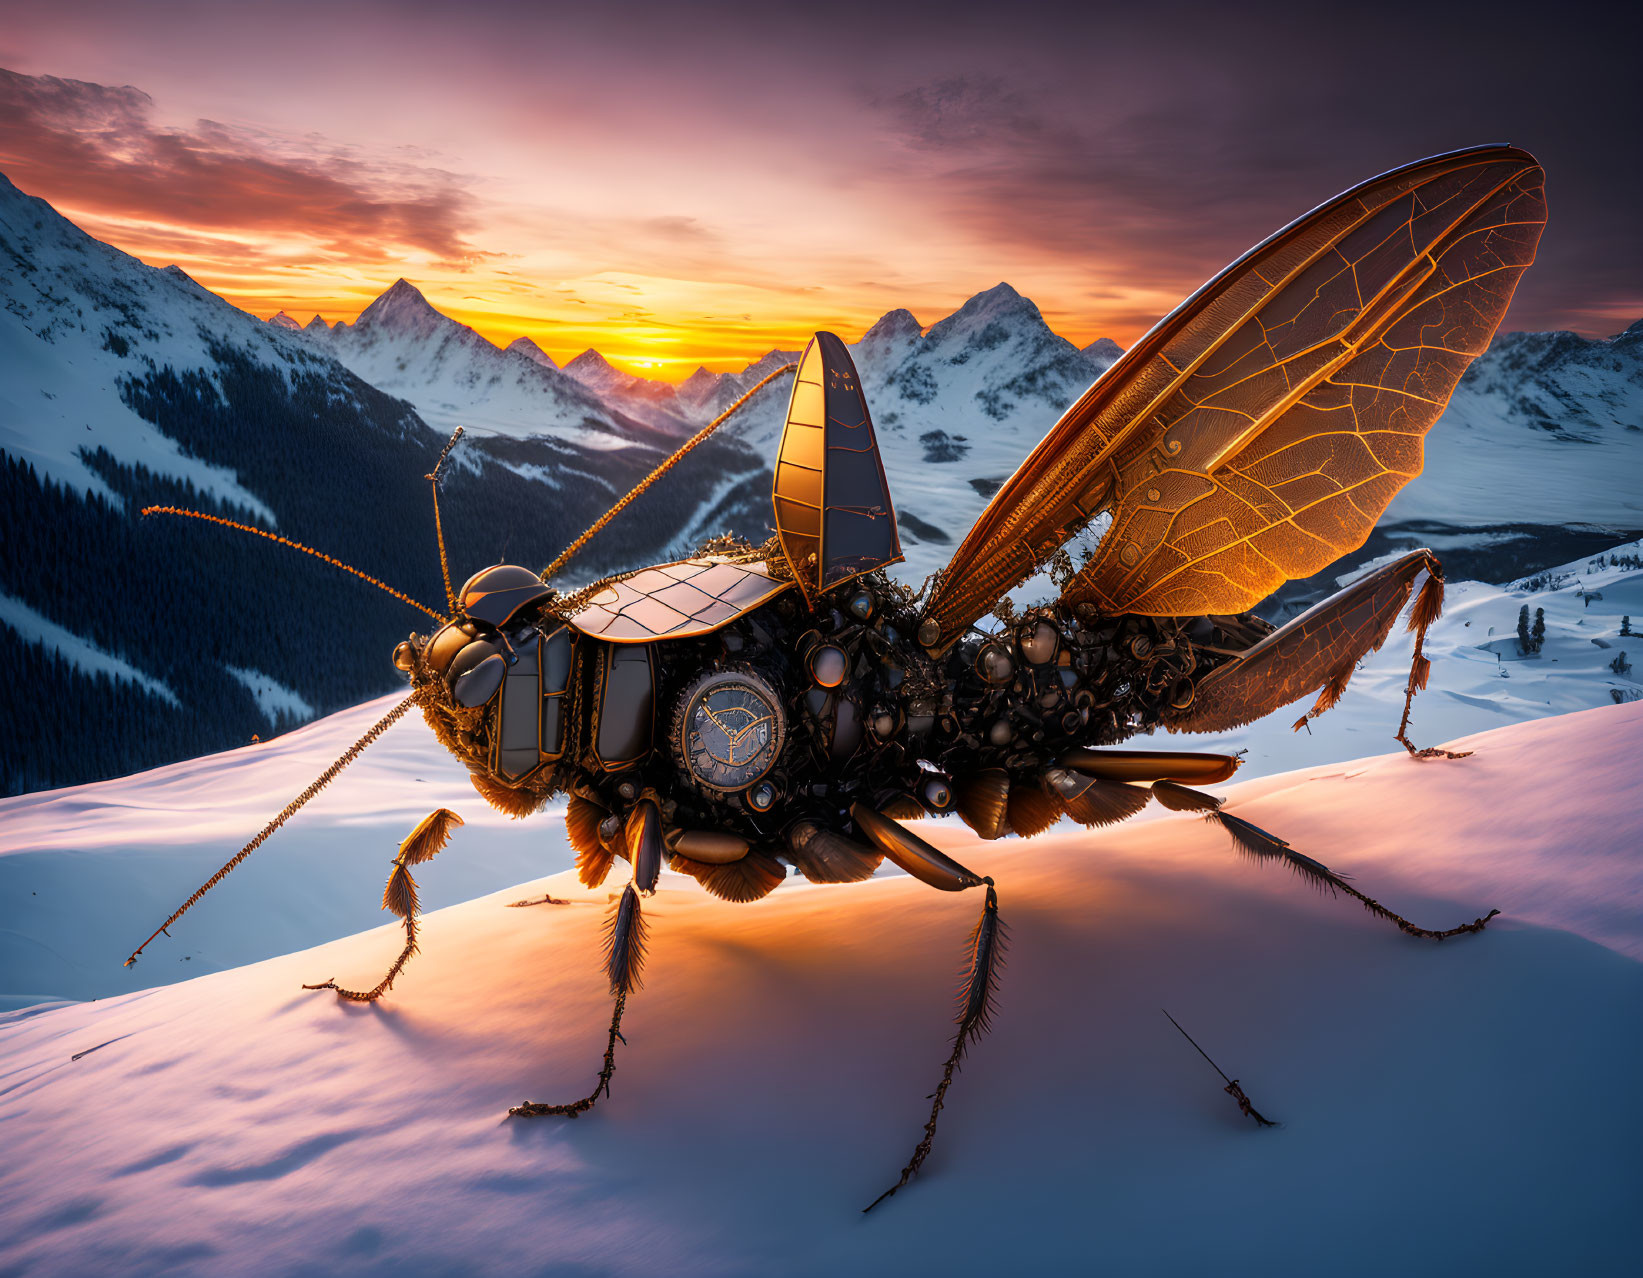 Mechanical bee on snowy peak with mountain backdrop at sunset